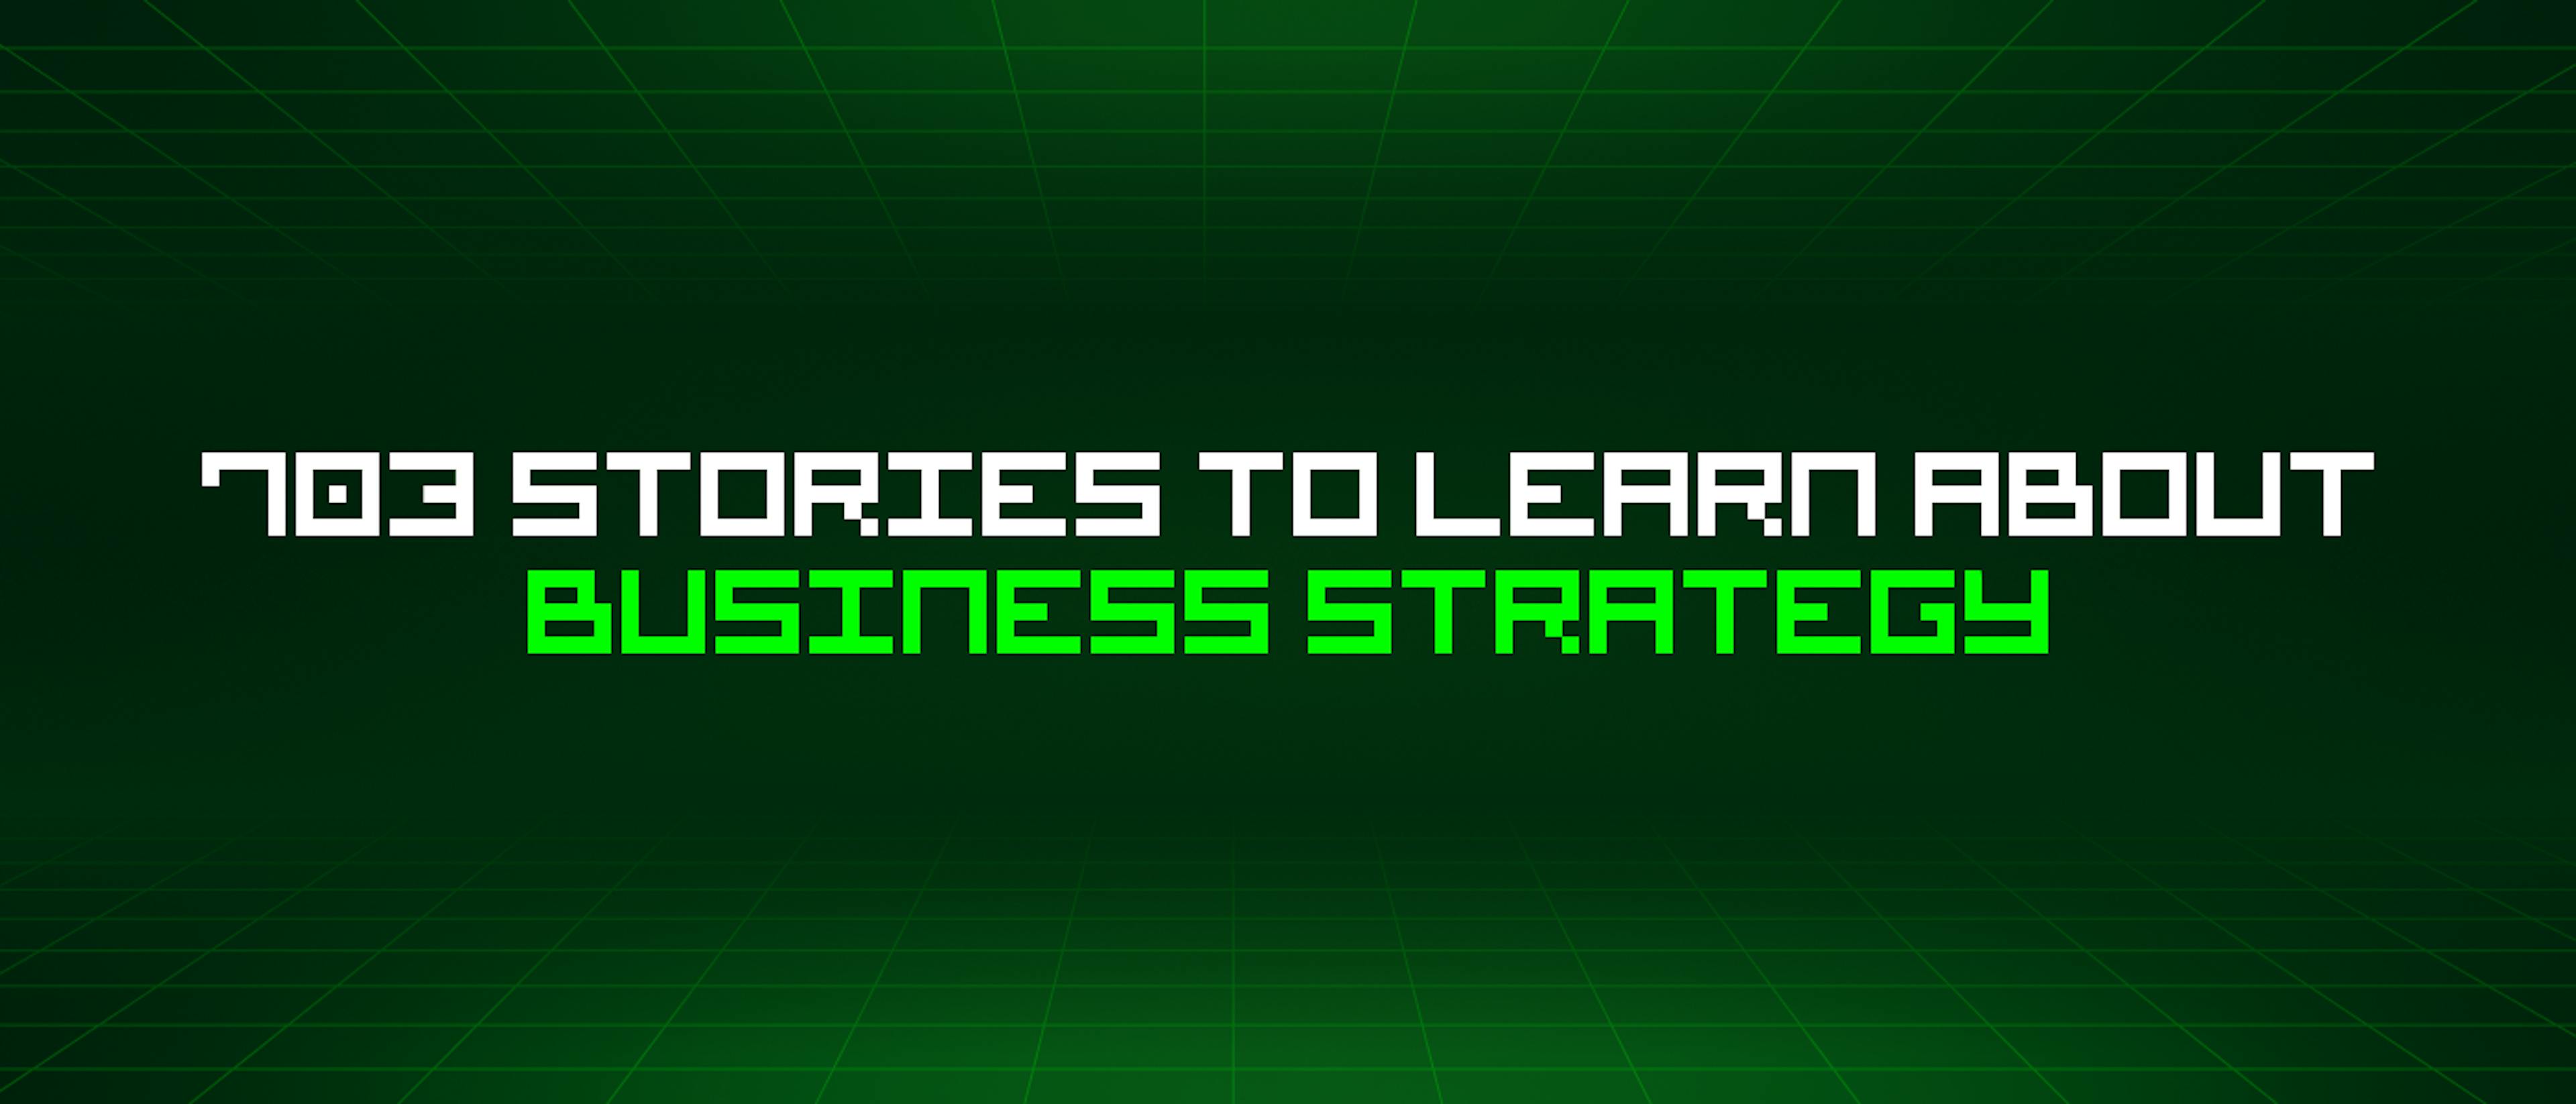 featured image - 703 Stories To Learn About Business Strategy